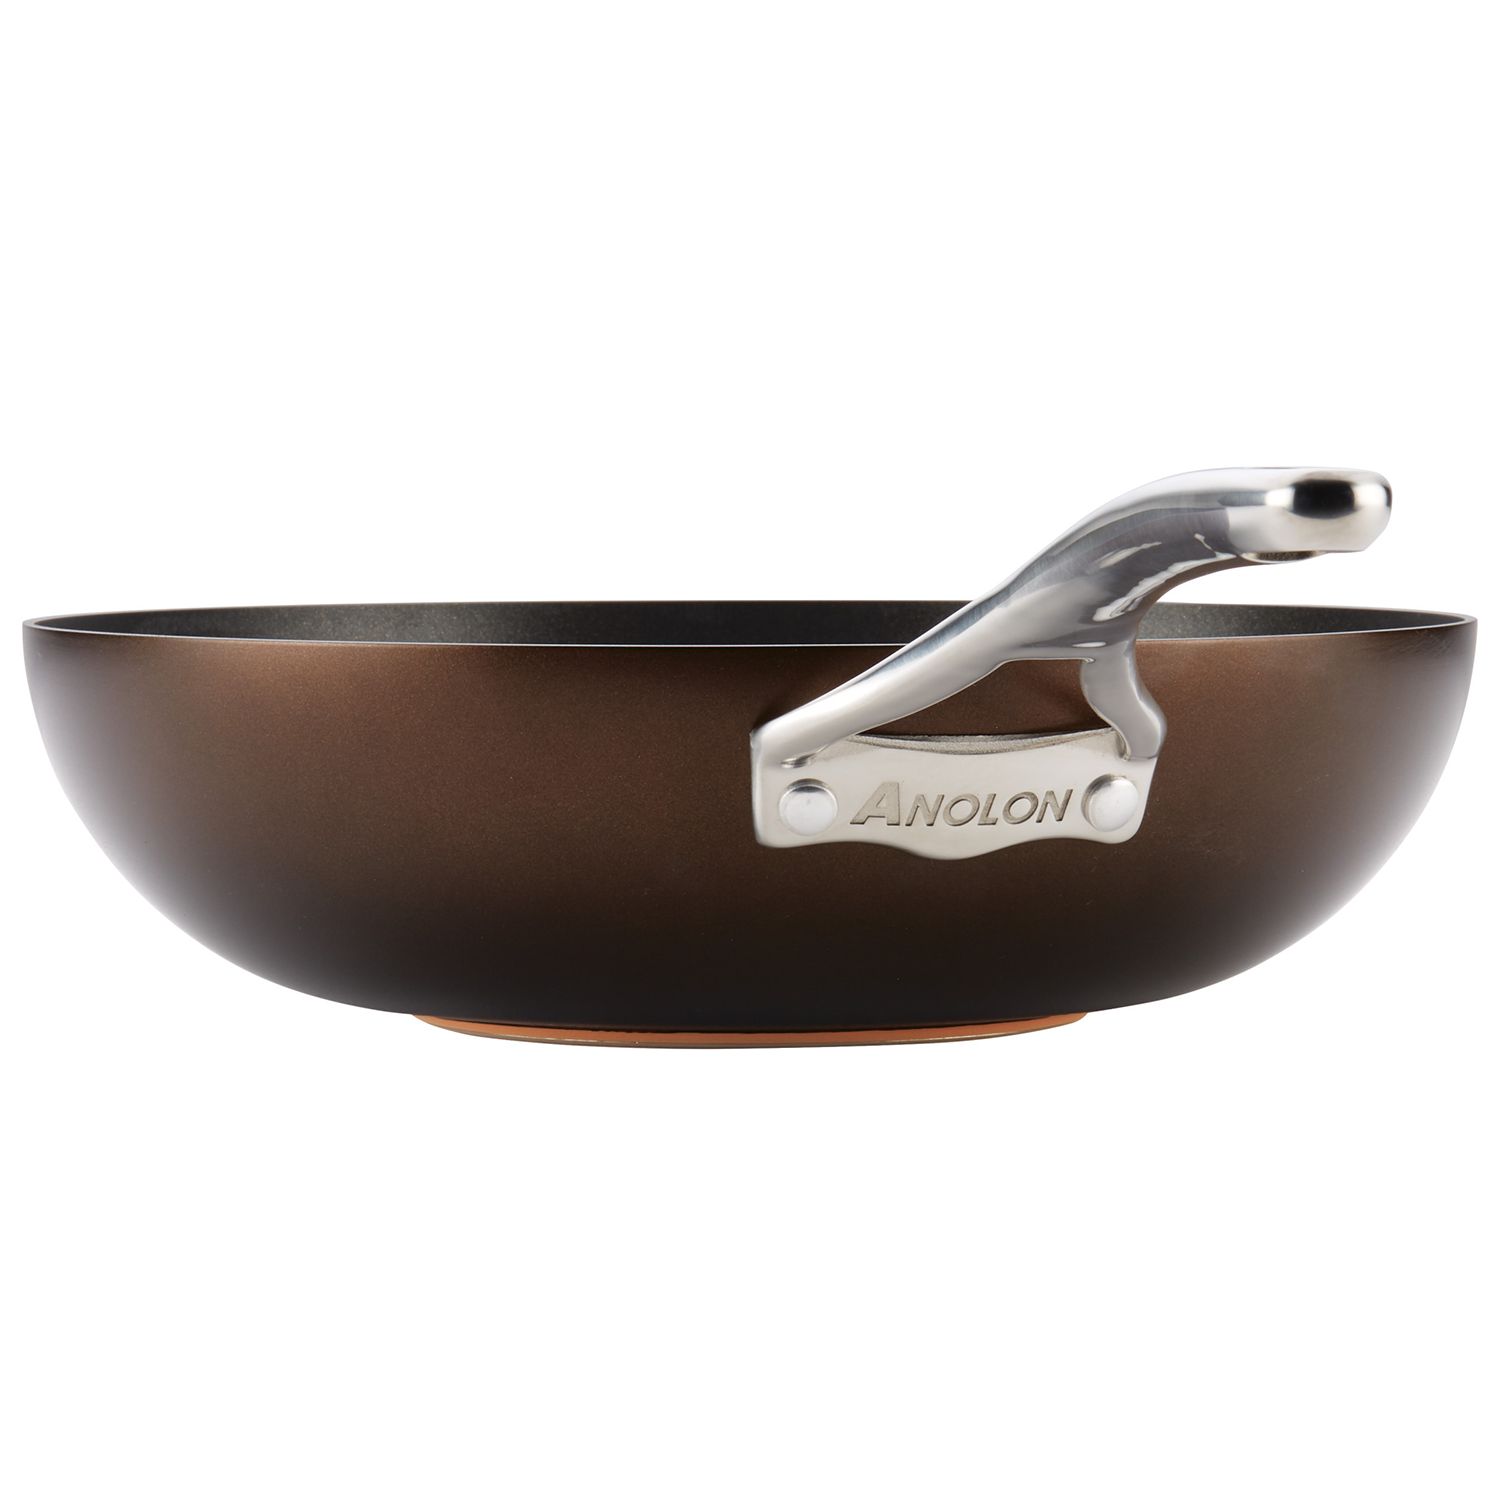 Oster Stonefire Carbon Steel Nonstick 16 Inch Paella Pan in Copper